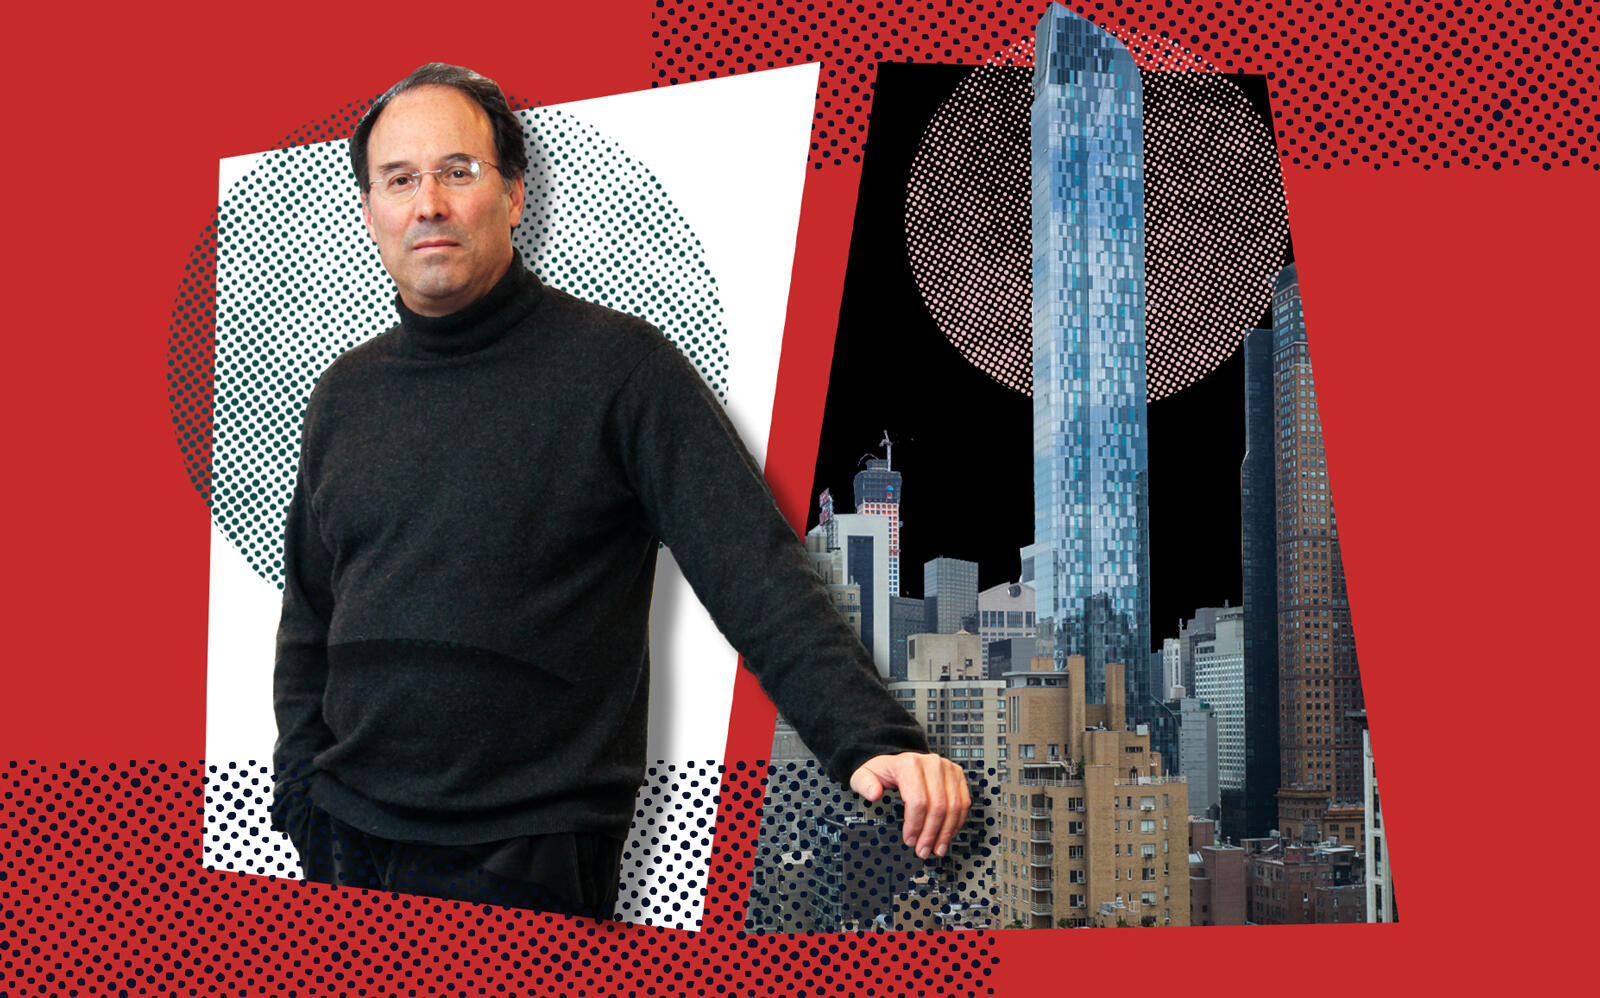 Extell's Gary Barnett and One57 (Getty)